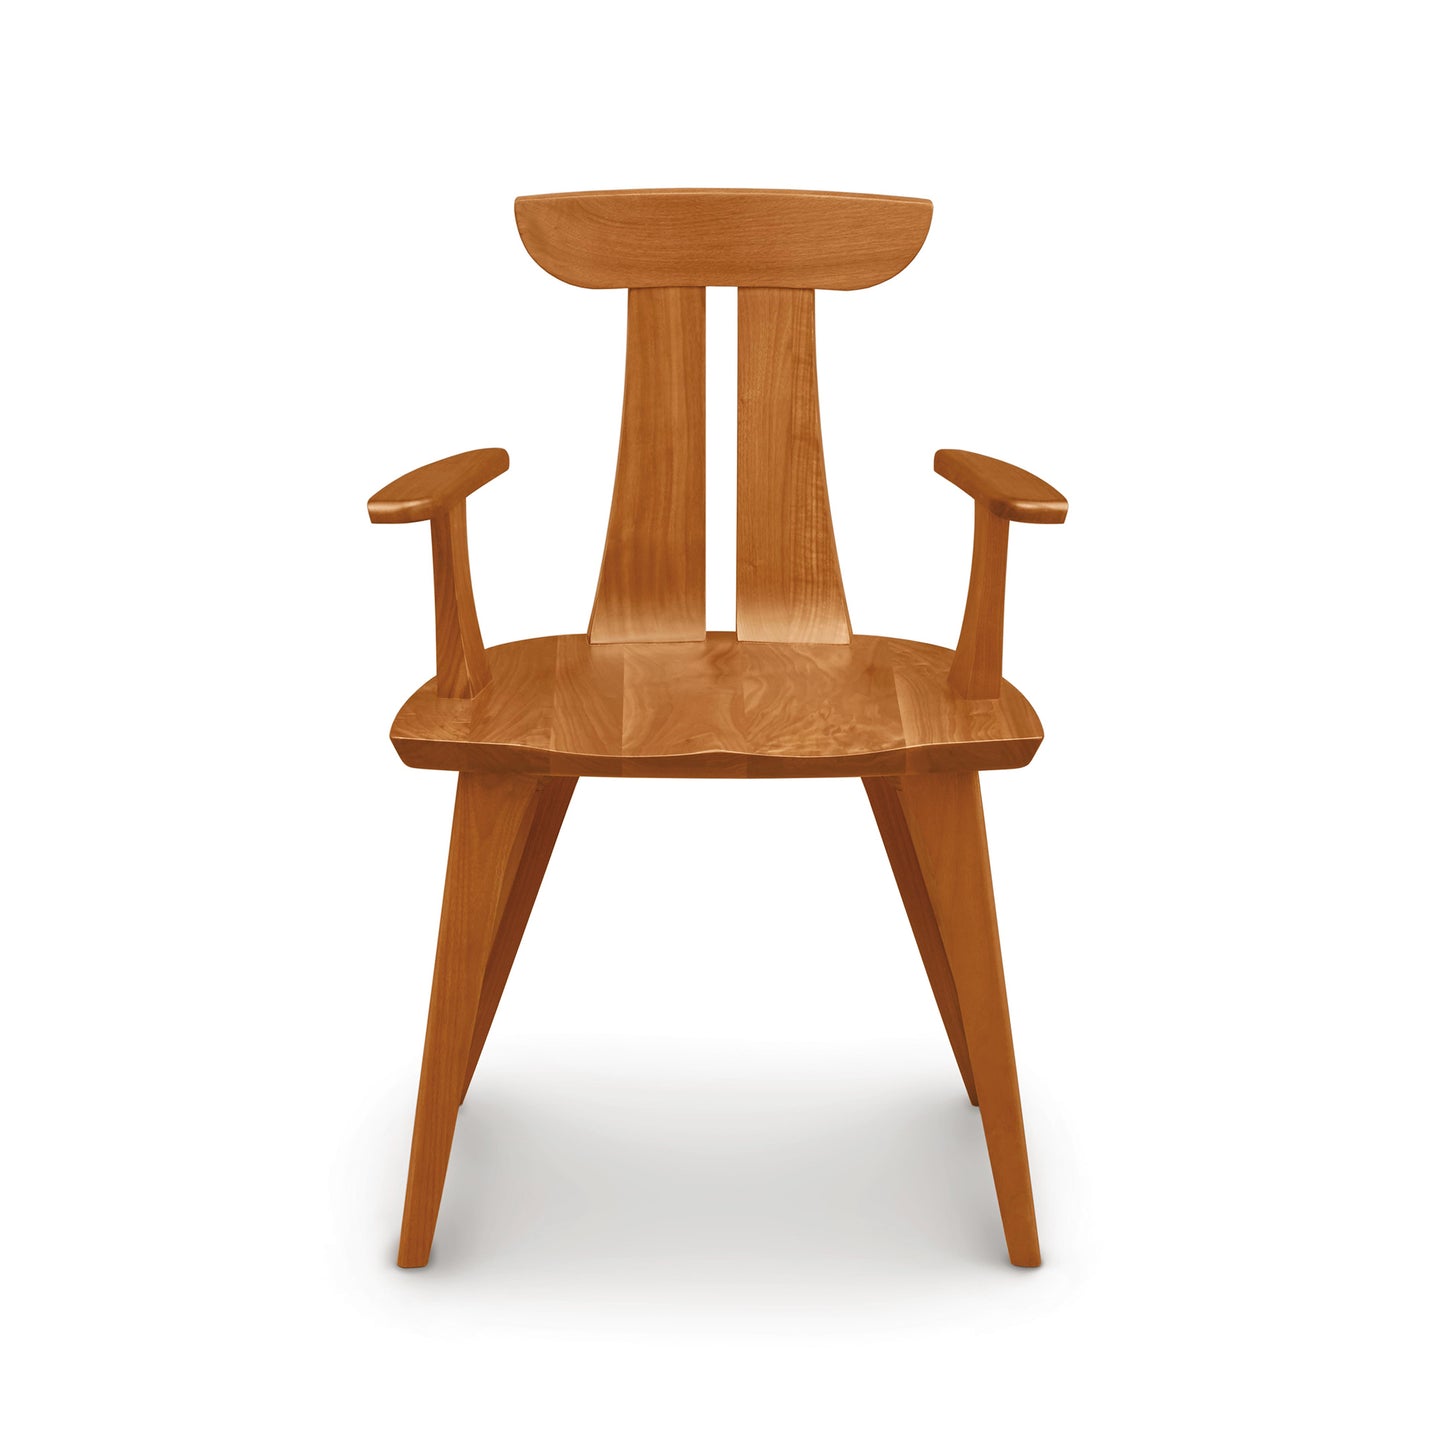 A Copeland Furniture Estelle Cherry Arm Chair - Floor Model featuring mid-century modern design, crafted from beautiful American Walnut wood, placed on a white background.